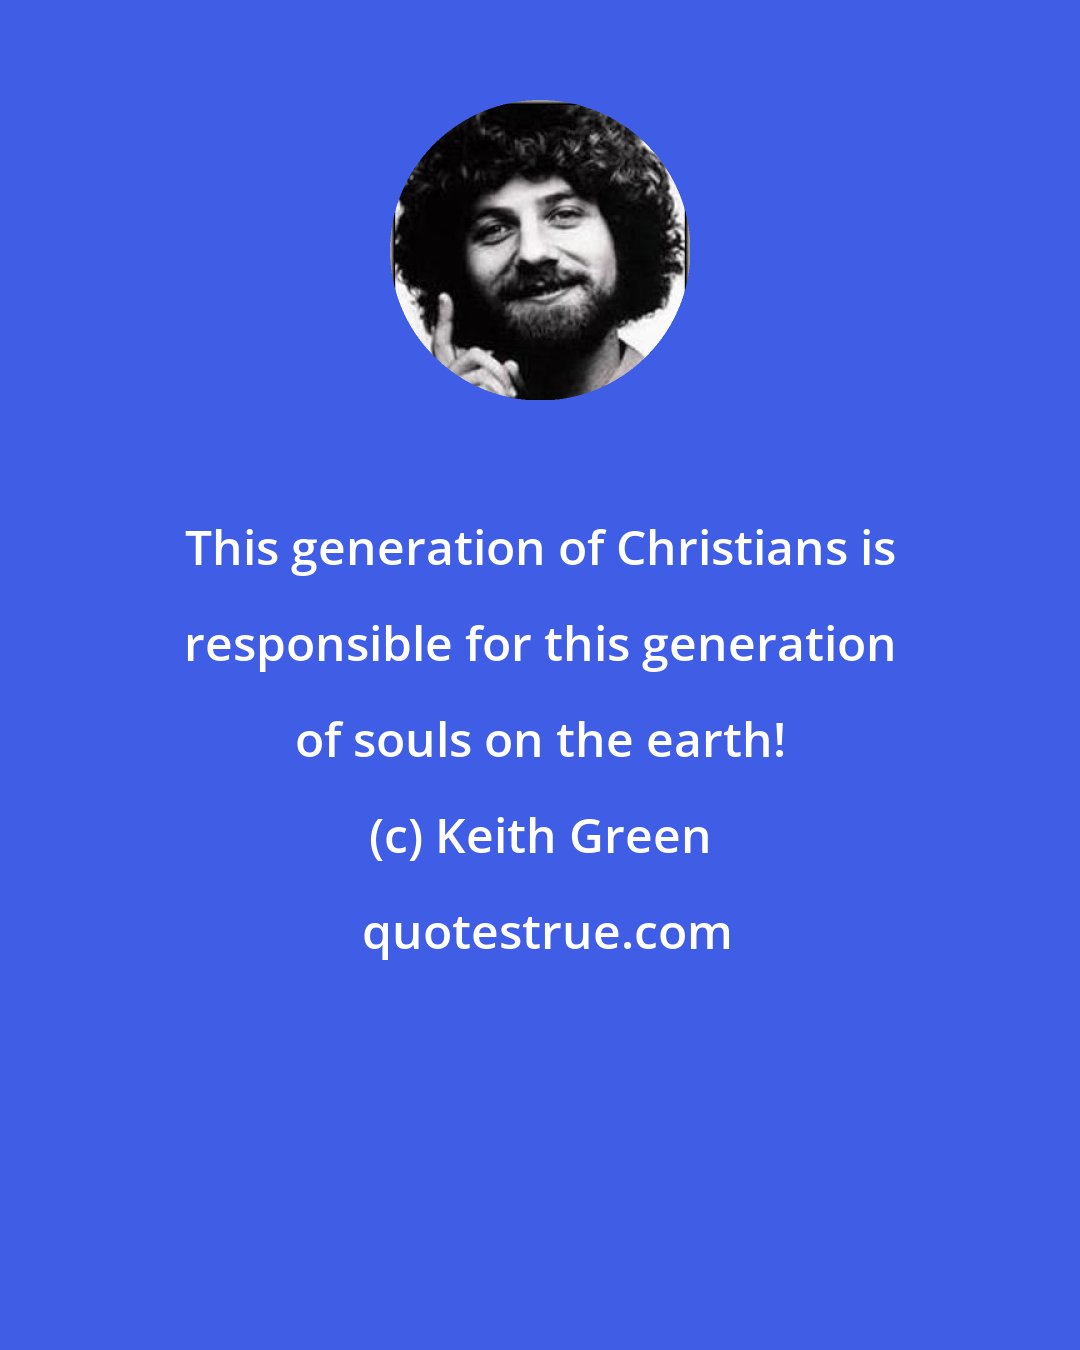 Keith Green: This generation of Christians is responsible for this generation of souls on the earth!